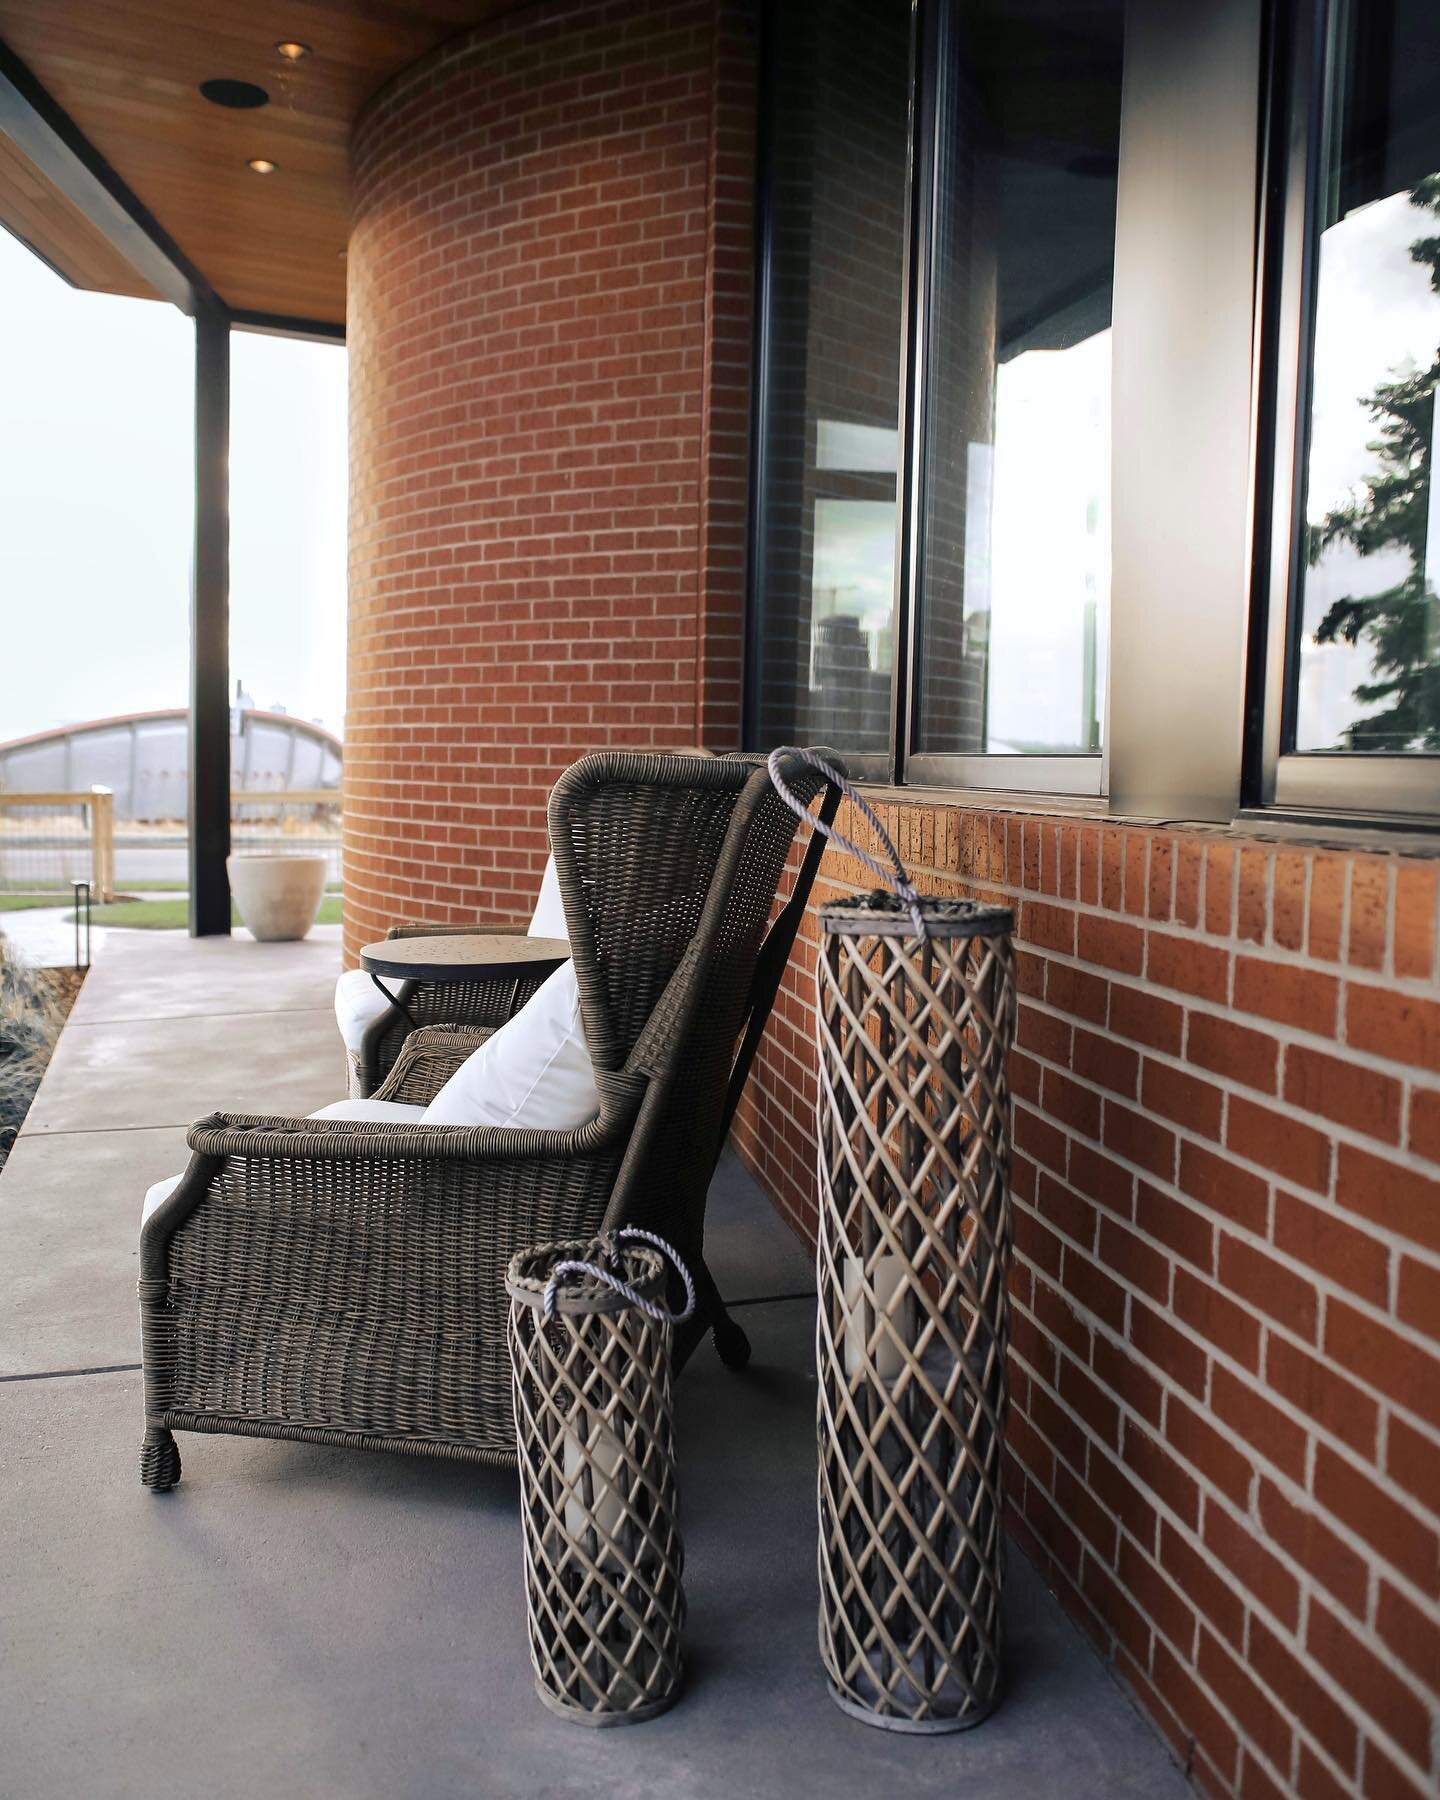 Can you envision waking up to enjoy your cup of coffee right here? 

This is what mornings are made of 👌🏽

.
.
.
.
.
.
.
.
.
.
#yychomes 
#masonry 
#redbrick 
#calgaryhomes 
#yycnow 
#yycmorning 
#coffeeinthemorning 
#calgaryalberta 
#ruralalberta 